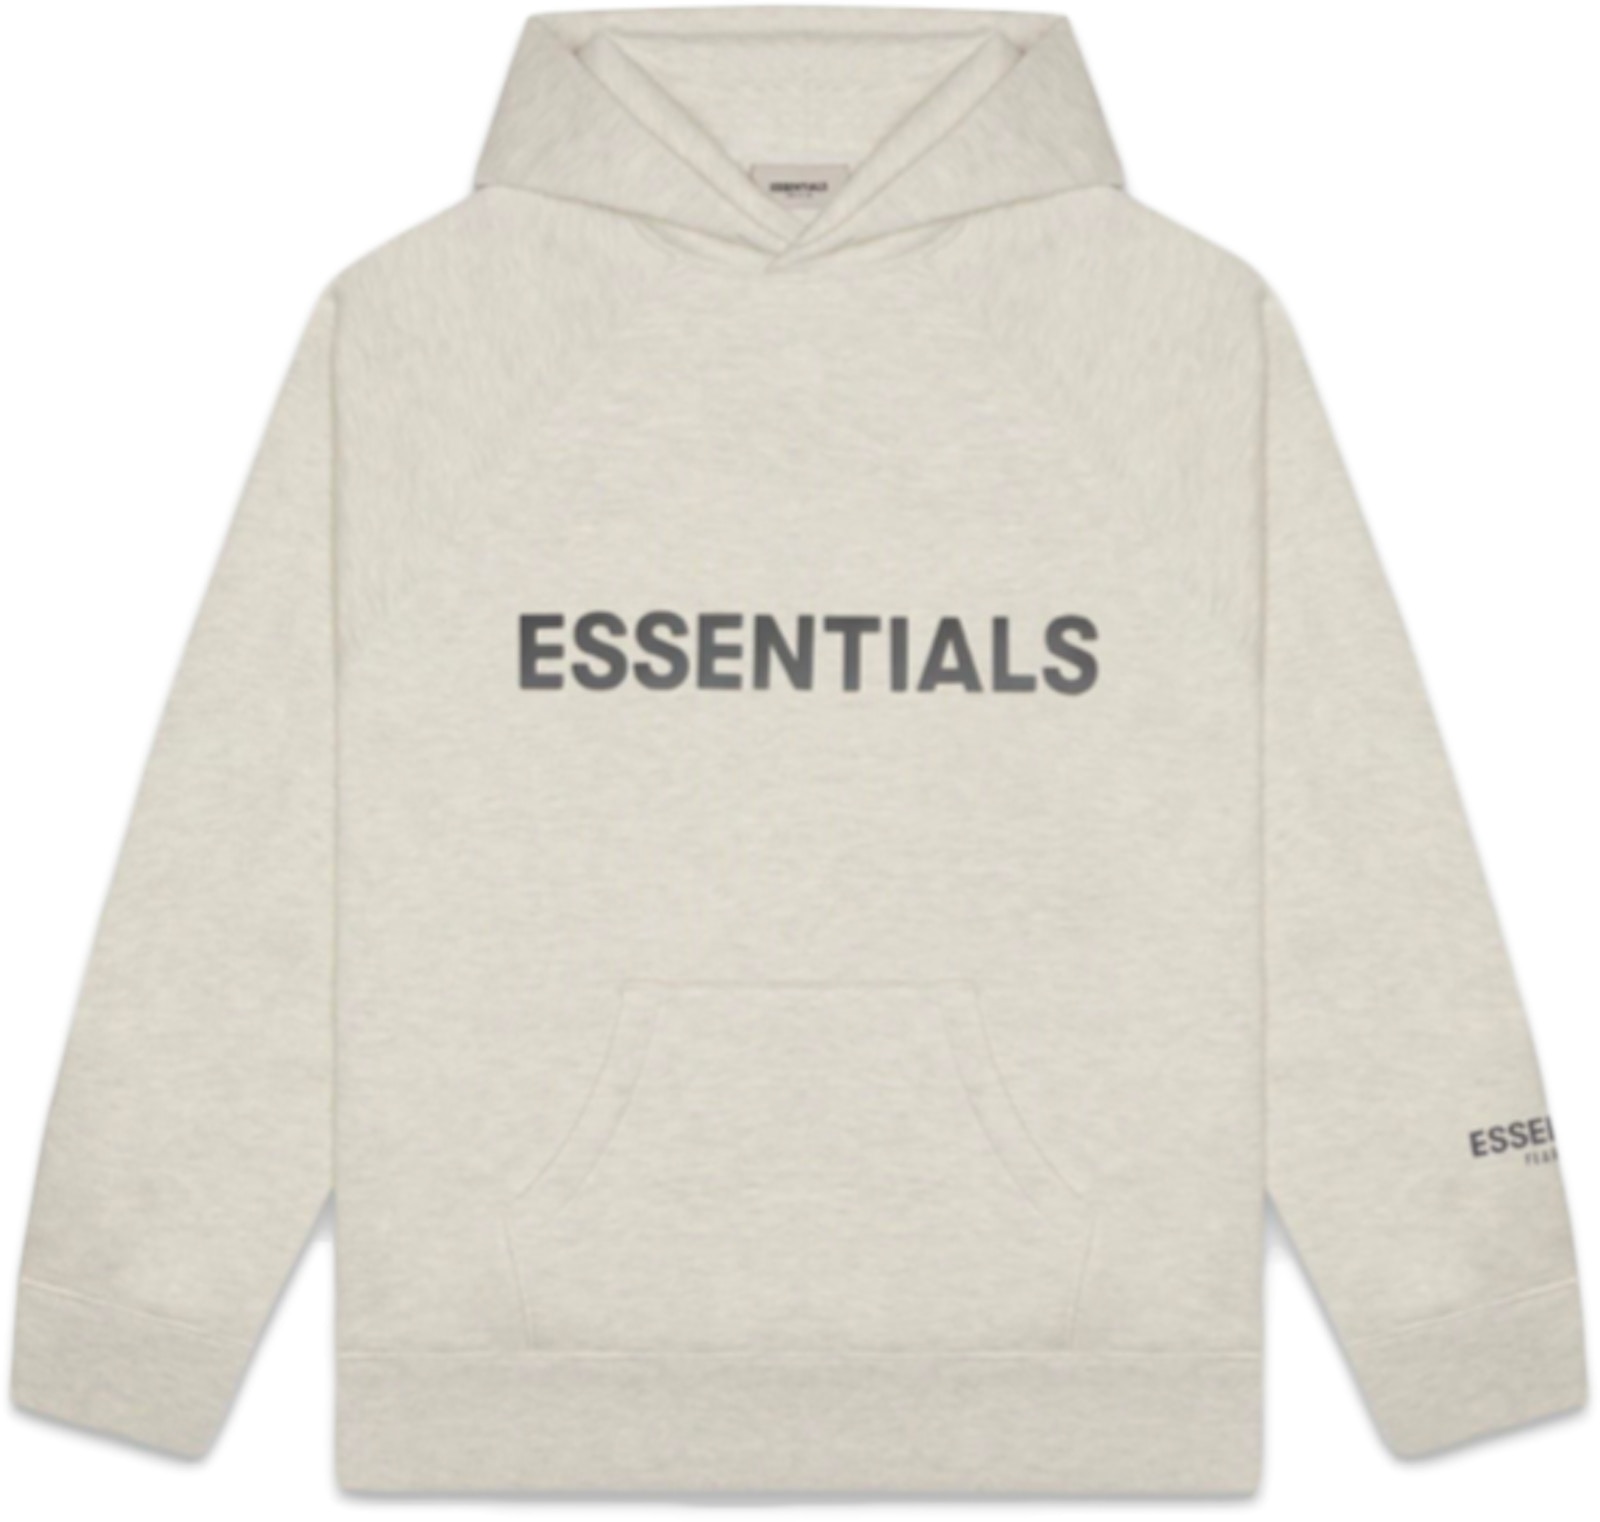 FEAR OF GOD ESSENTIALS 3D Silicon Applique Pullover Hoodie Oatmeal